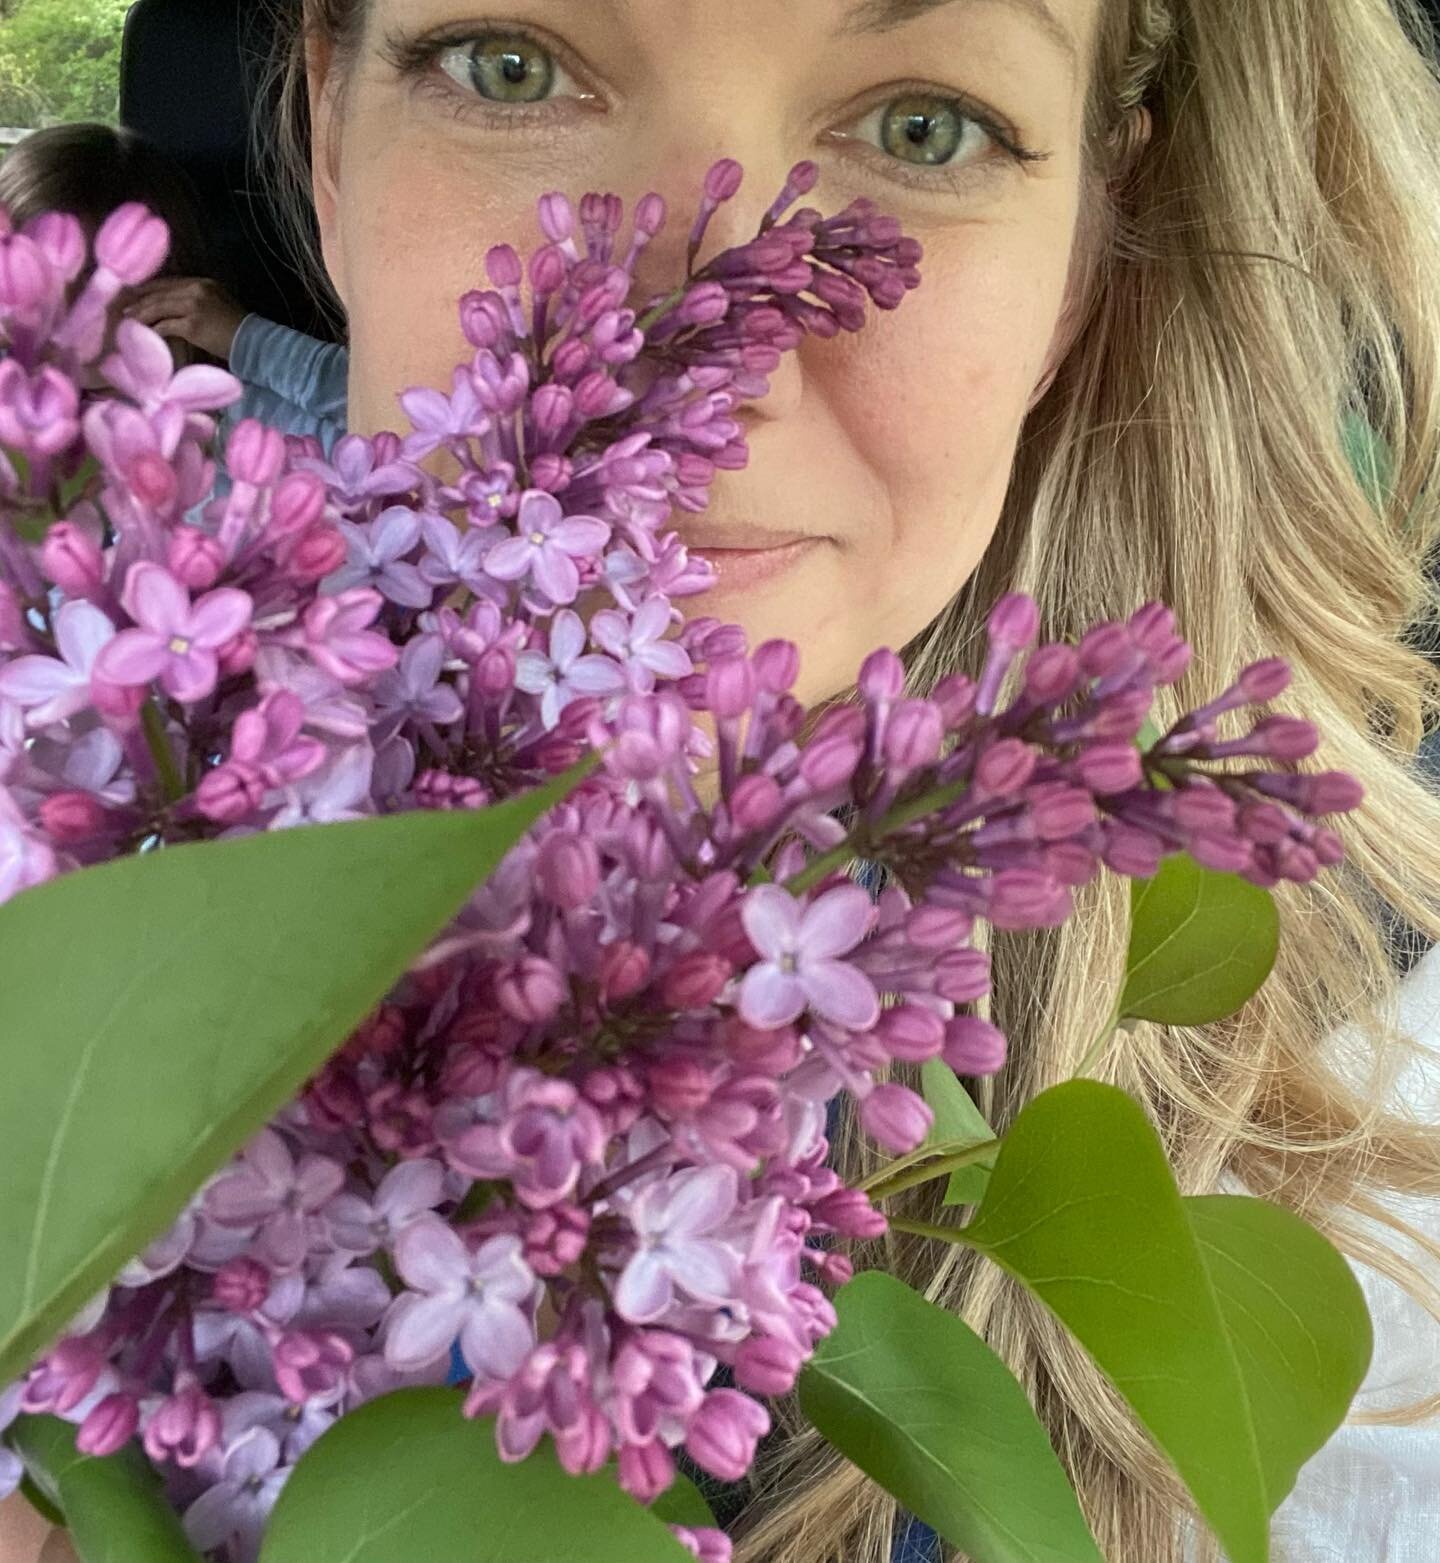 Inhale&hellip;🌱 An armful of lilacs is pretty hard to beat.